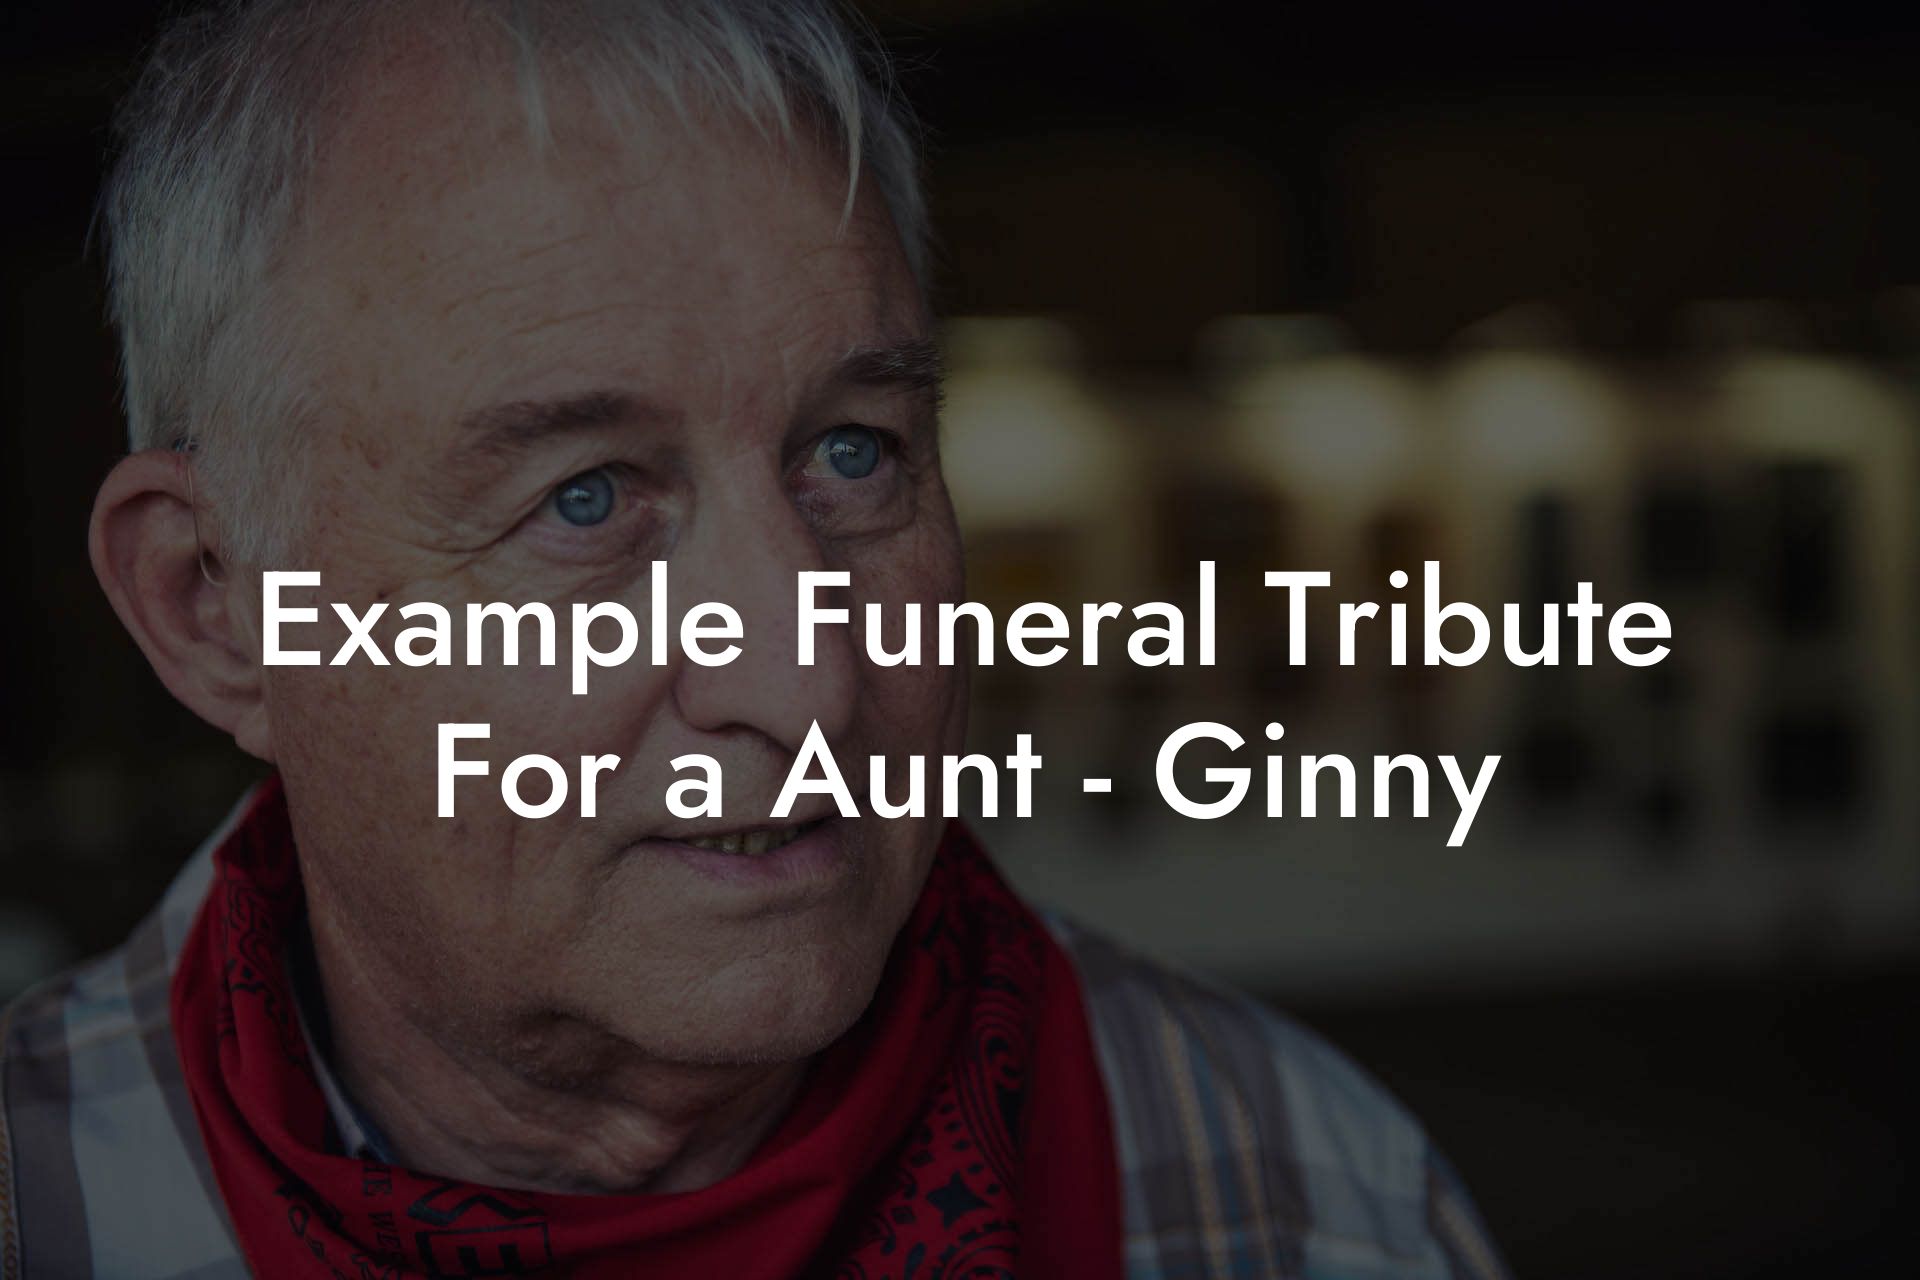 Example Funeral Tribute For a Aunt - Ginny